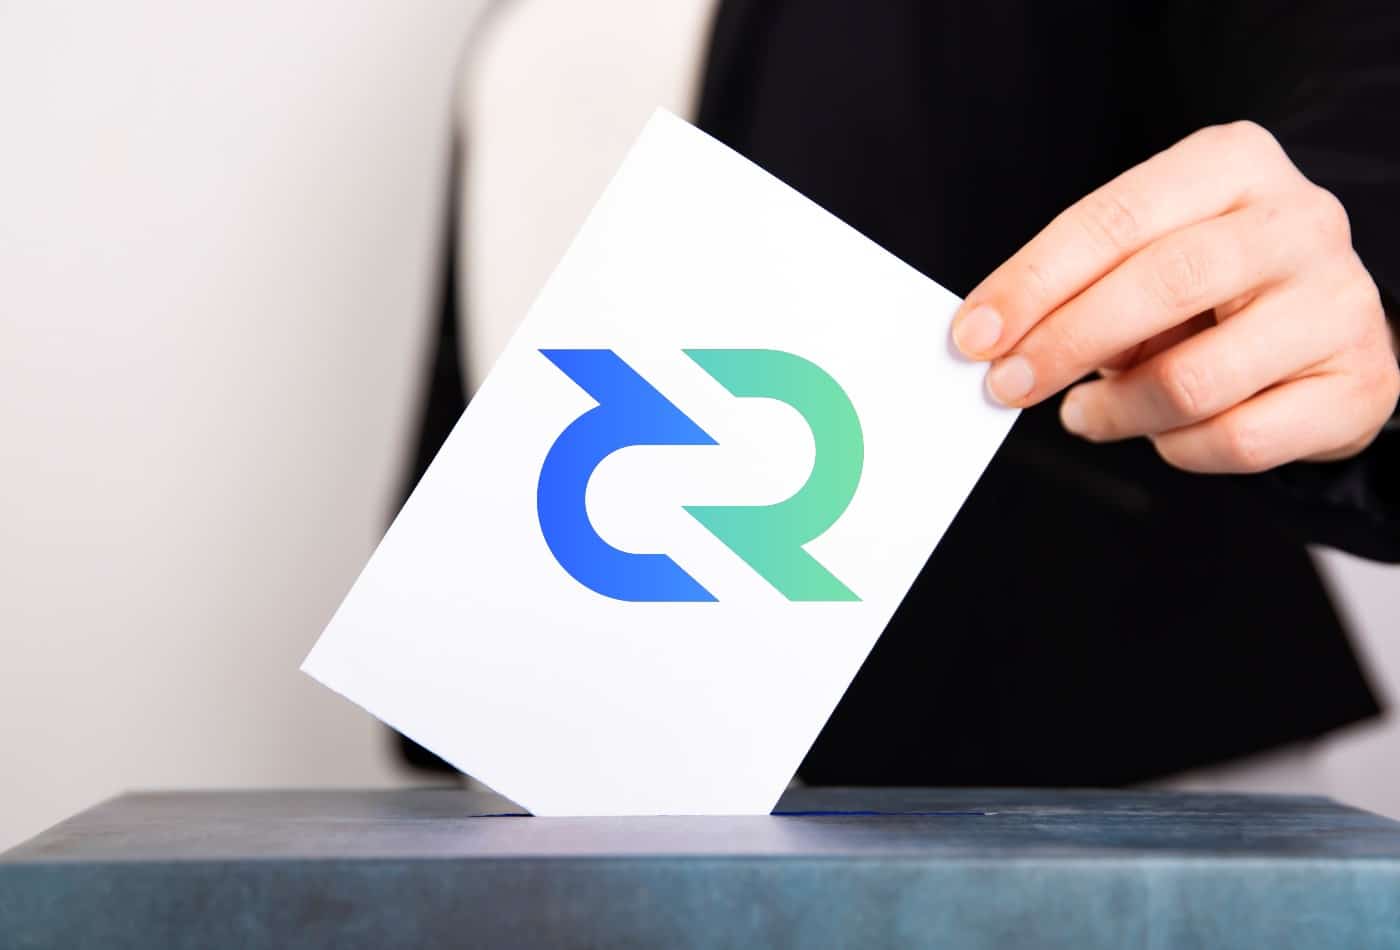 Decred (DCR) Price Prediction: The Best Forecast By The End Of 2030